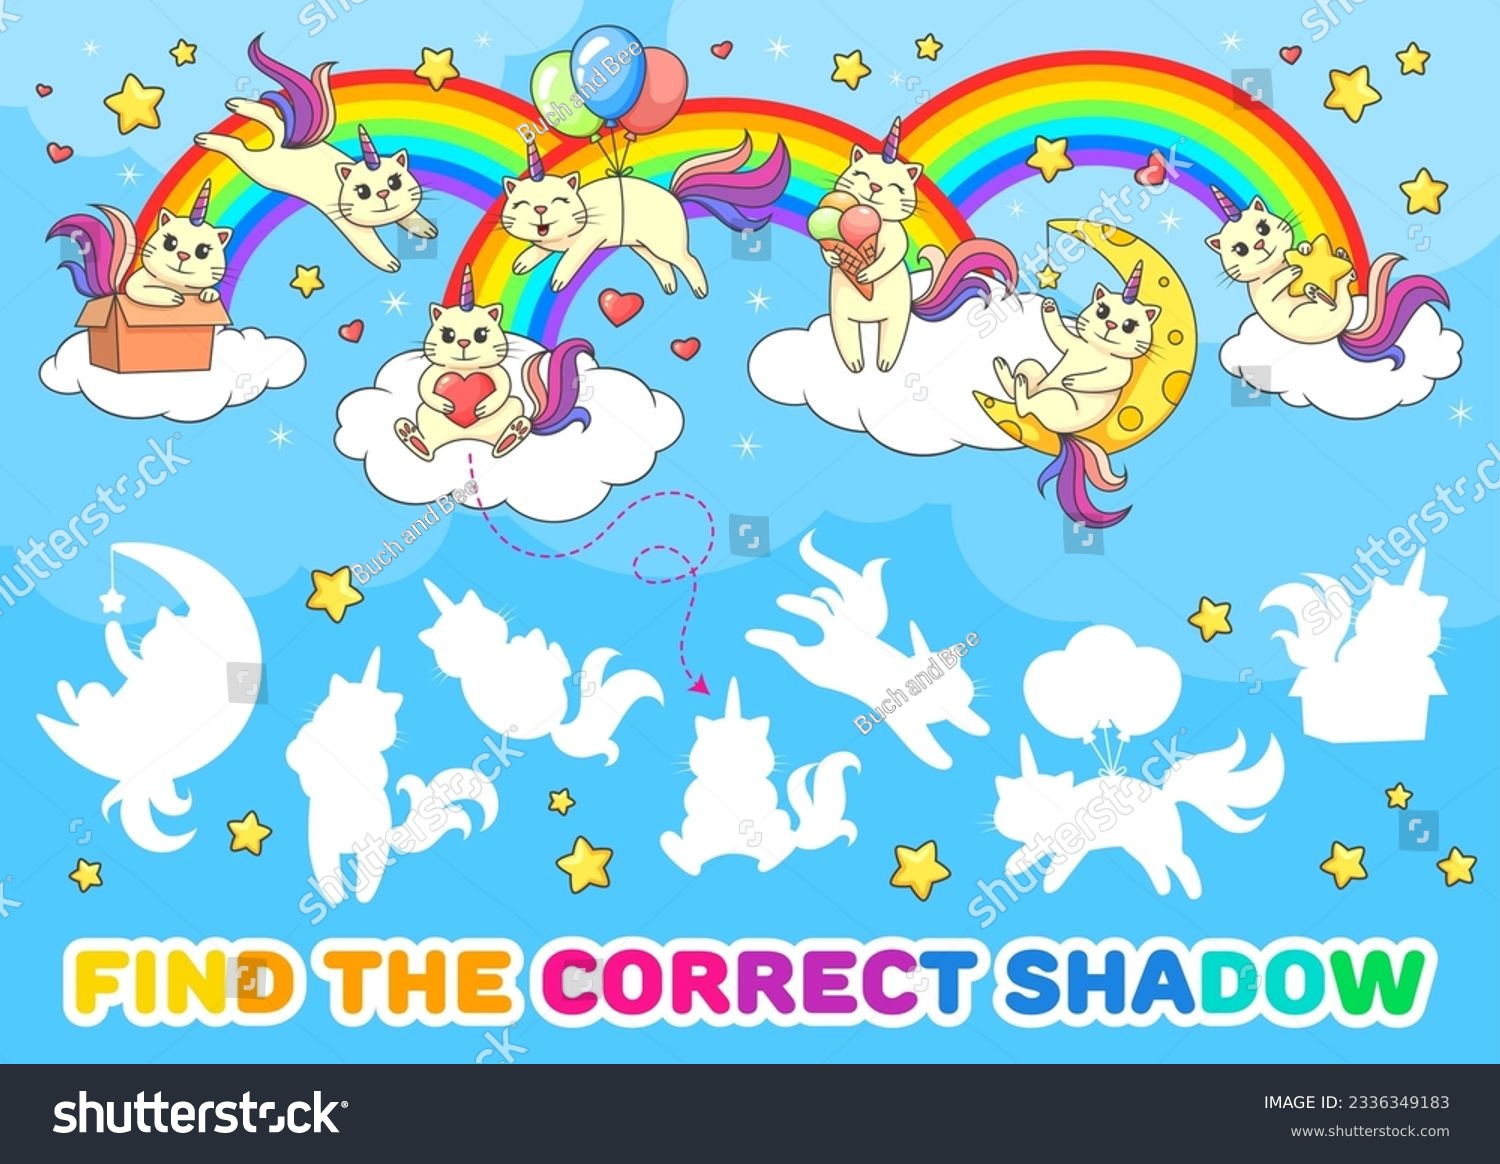 SVG of Find a correct shadow of cute caticorn cats and kittens, matching game worksheet. Vector puzzle quiz of cartoon unicorn cat characters playing with rainbow, balloons, box, ice cream on sky background svg